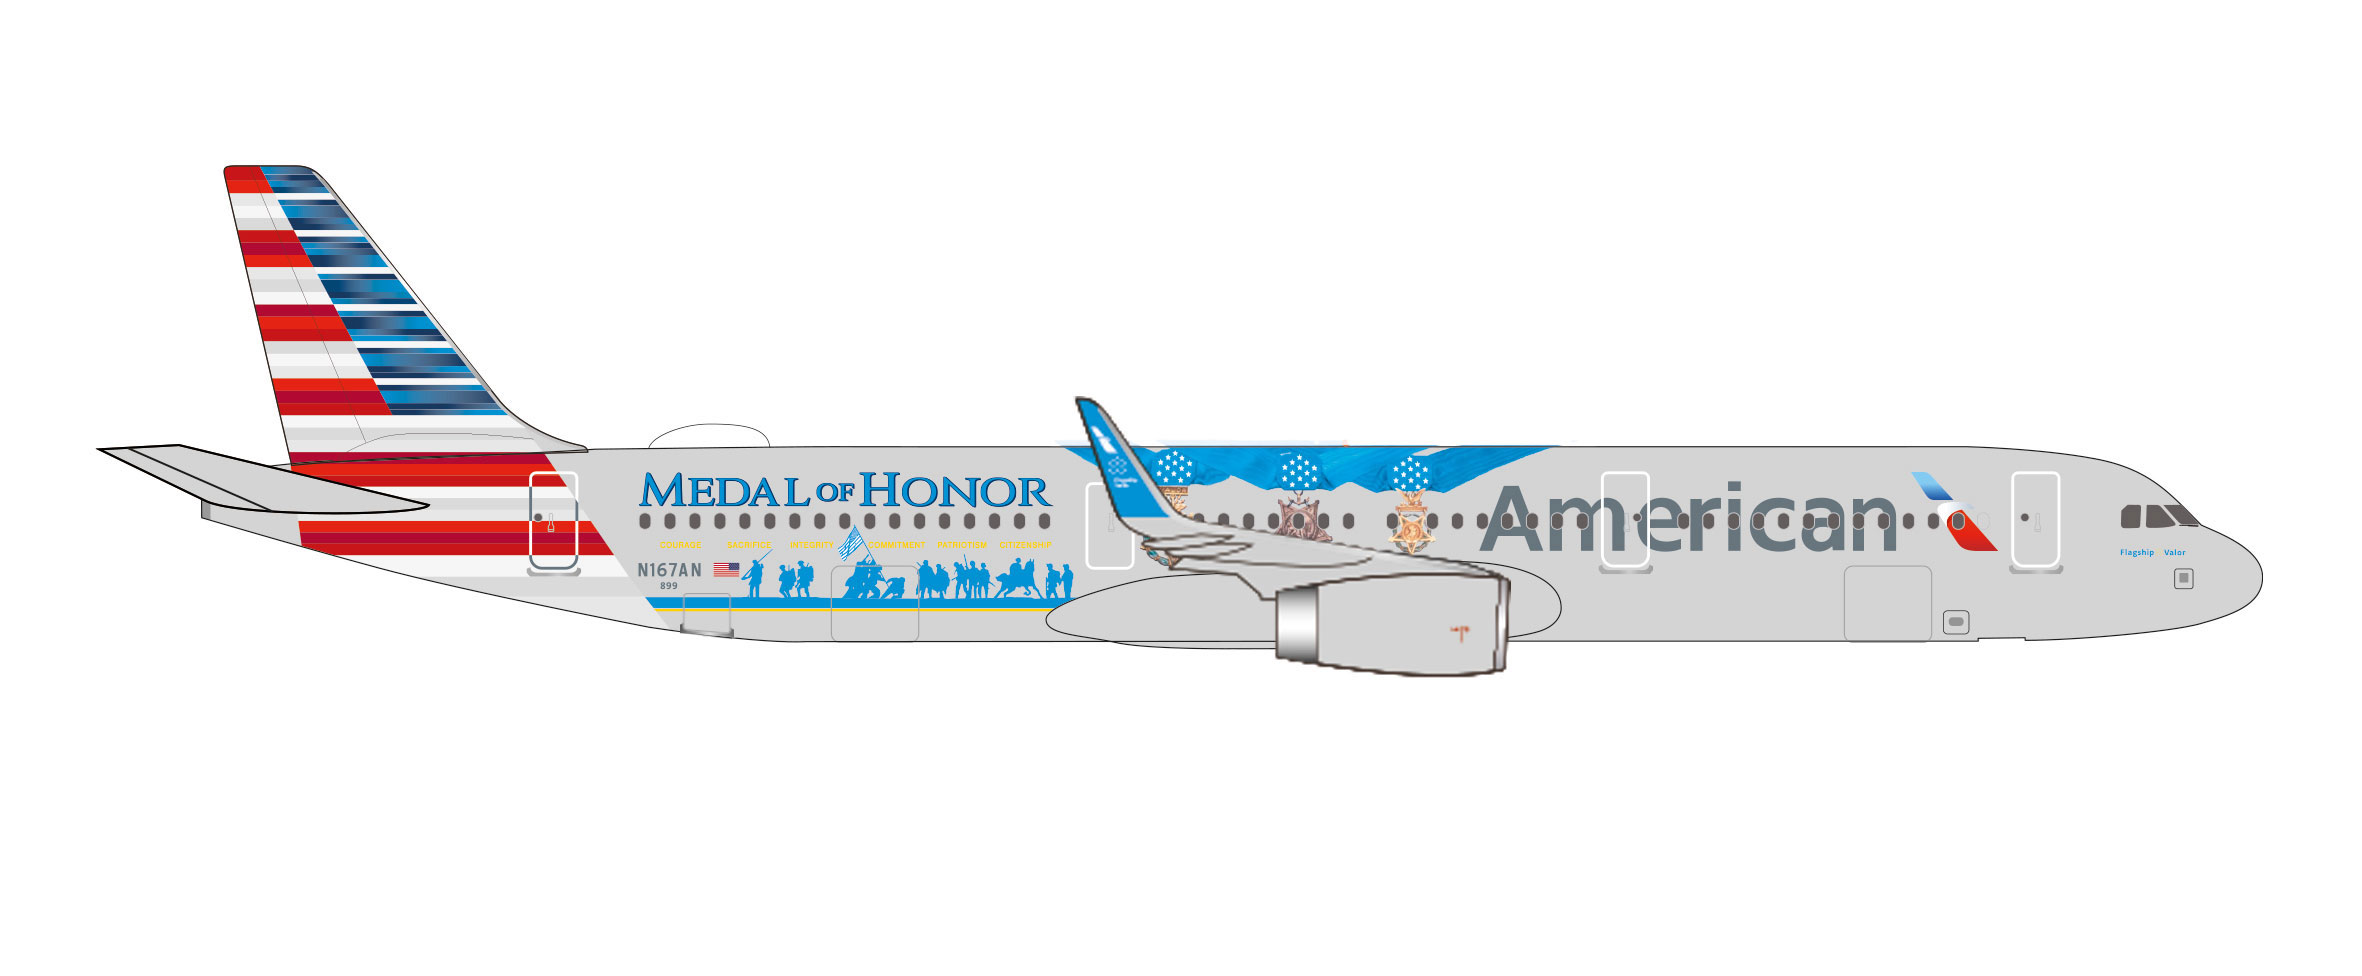 American Airlines Airbus A321 – Medal of Honor – Reg.: N167AN "Flagship Valor"